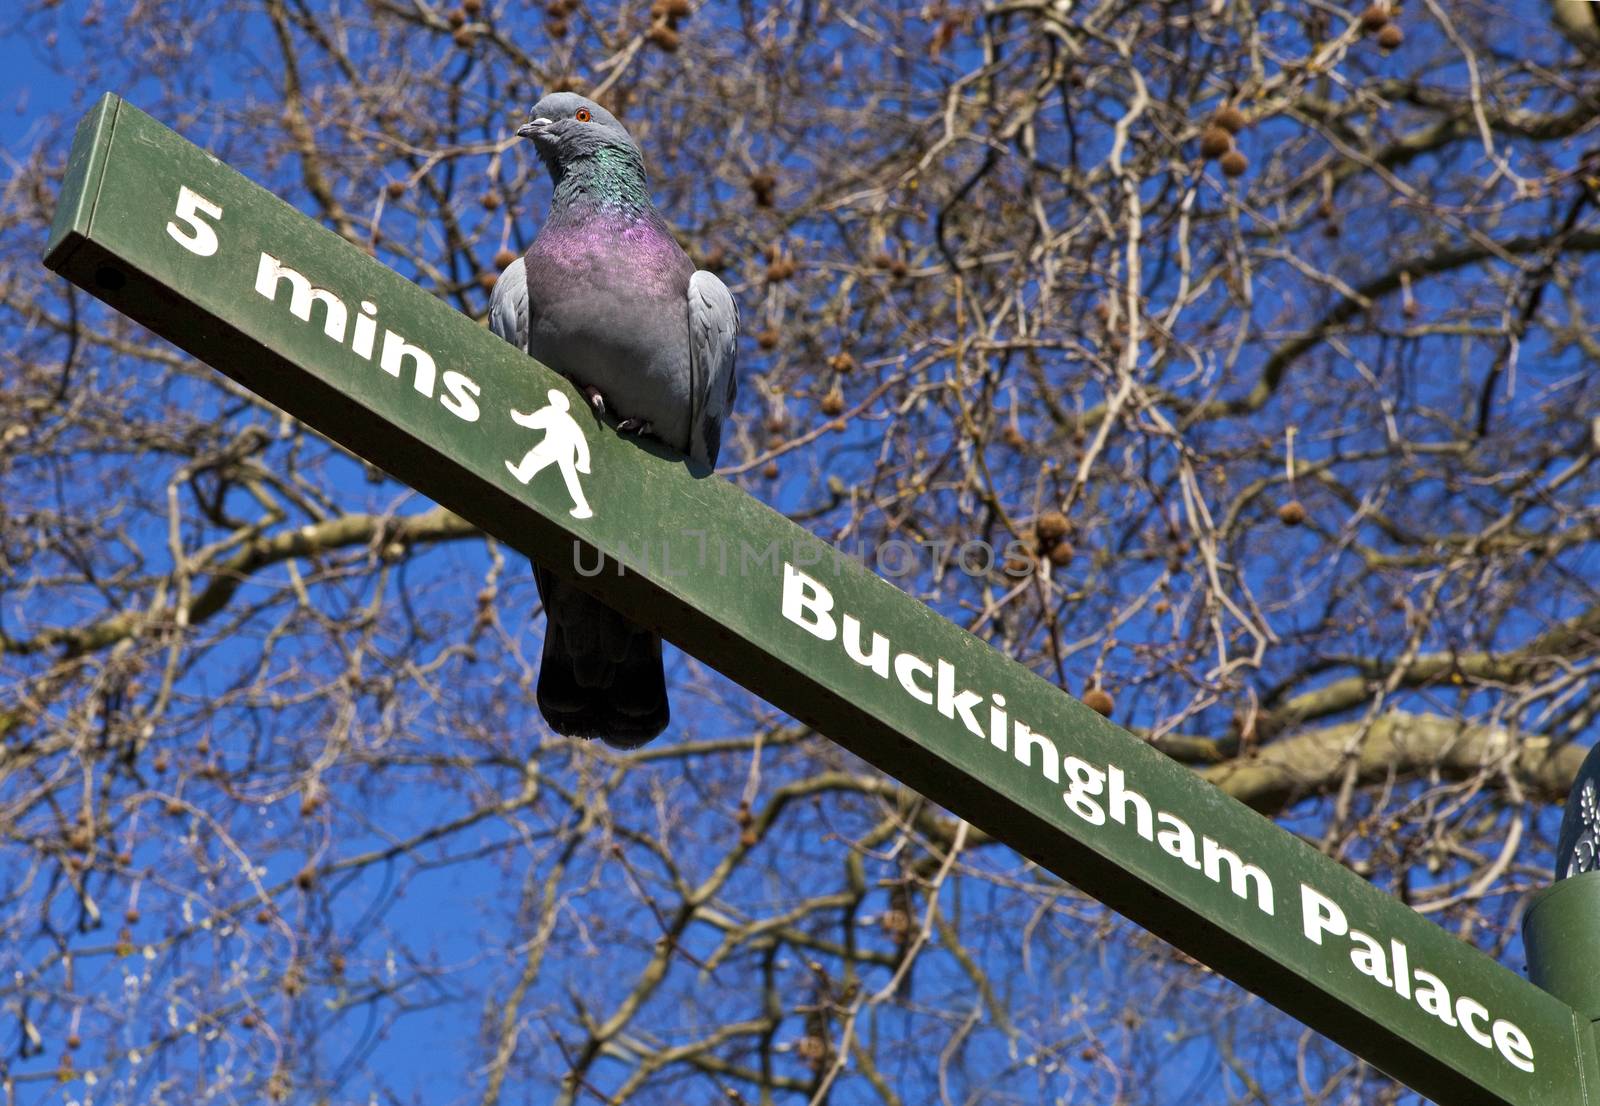 A pigeon on a 'Buckingham Palace' Pedestrian Signpost in London's St. James's Park.